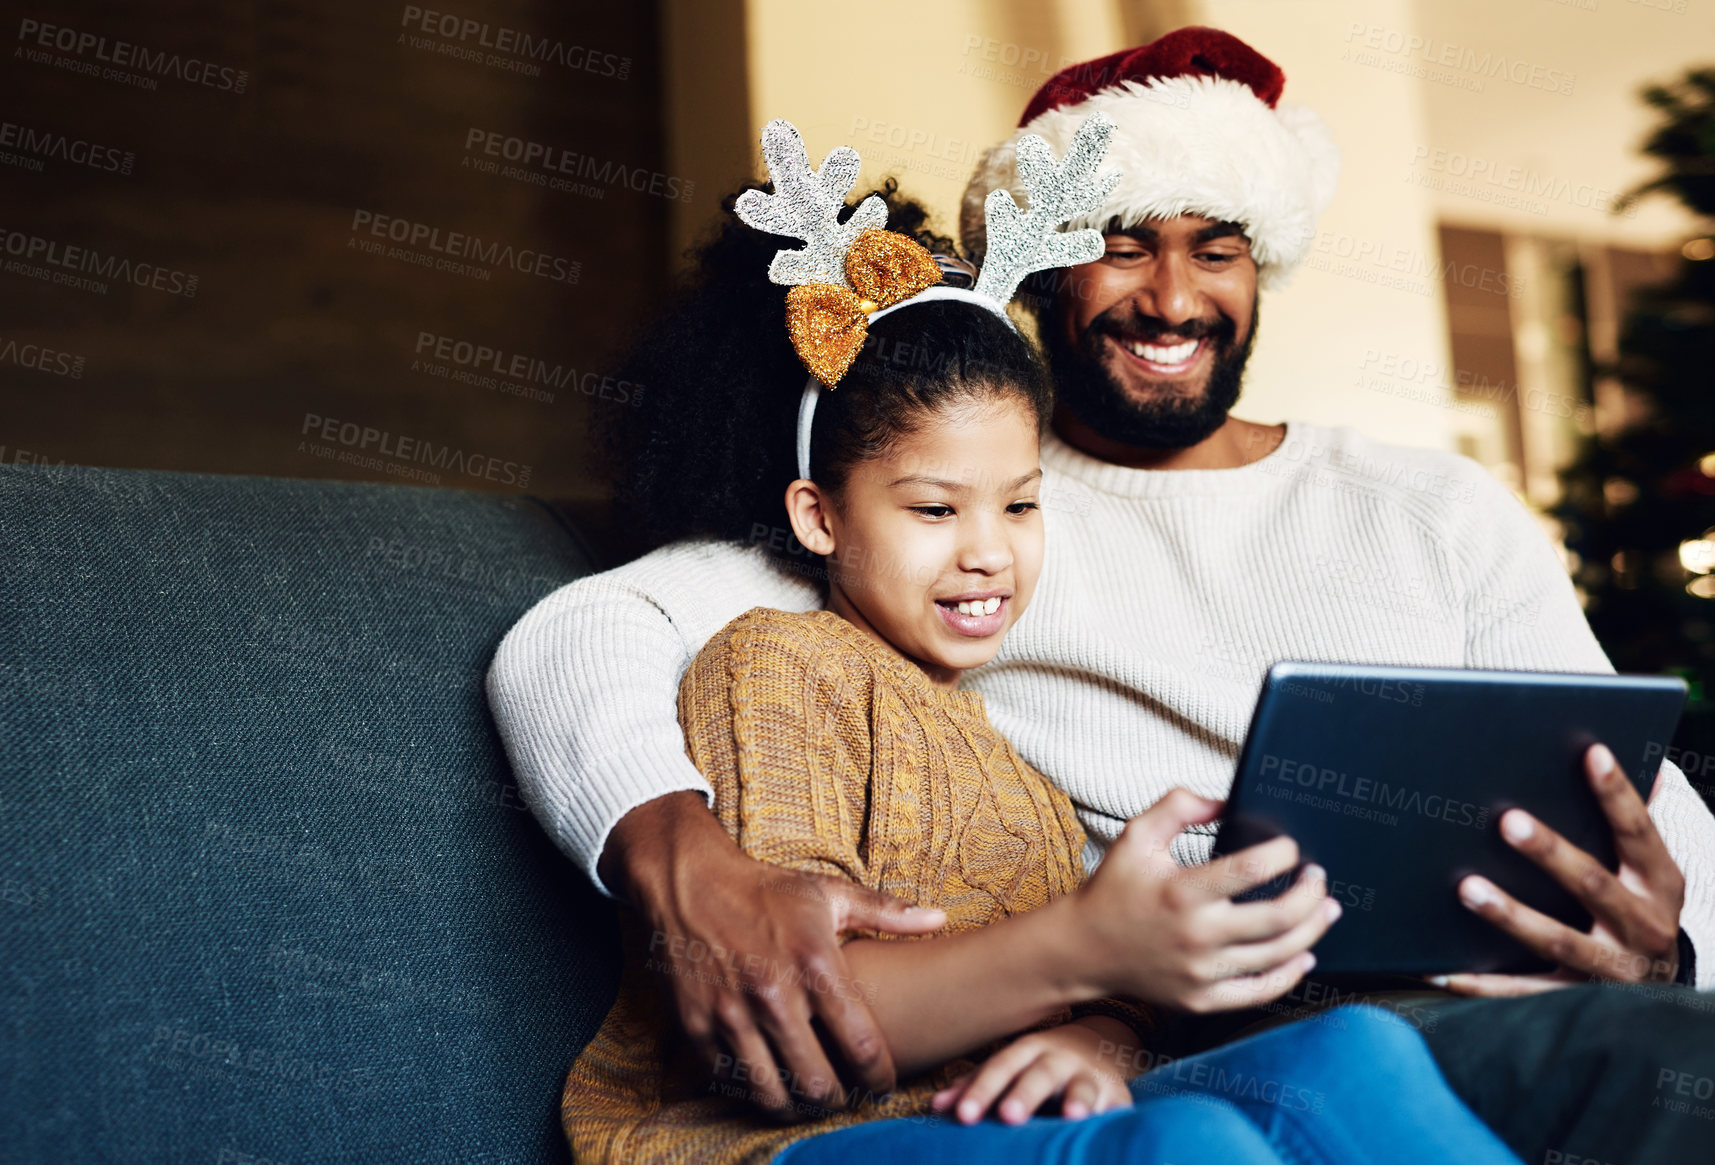 Buy stock photo Family Christmas, tablet and girl with father on sofa in living room streaming video, movie or web browsing. Love, xmas and kid with dad on digital touchscreen bonding, caring and enjoying holiday.